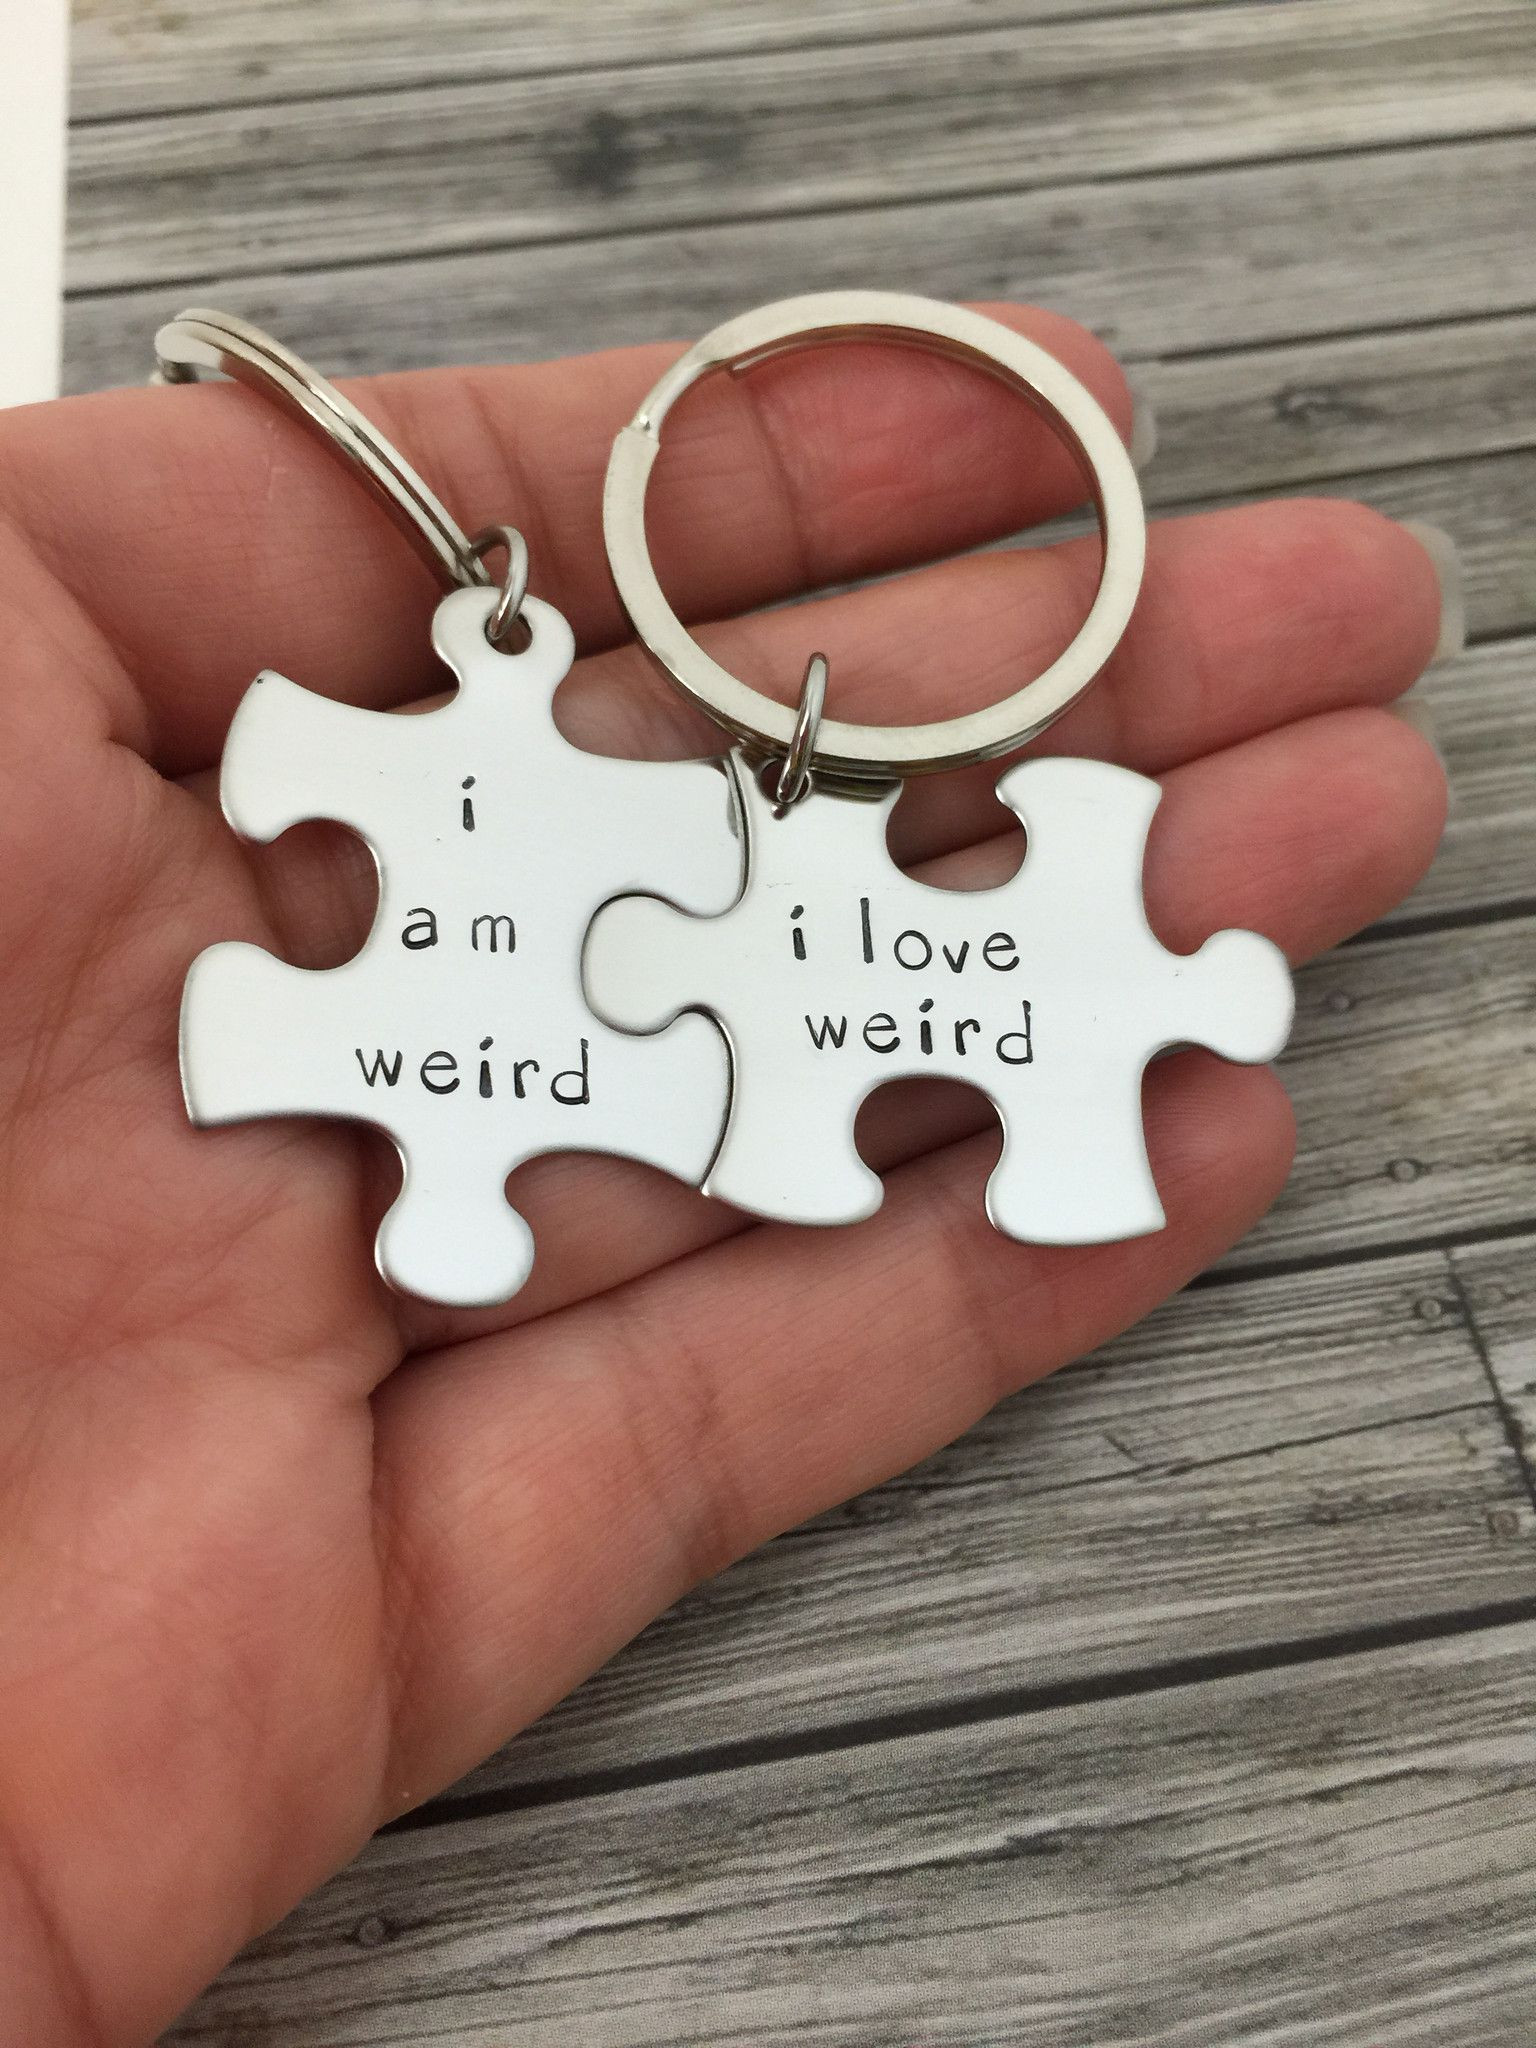 Funny Gift Ideas For Couples
 Pin on DIY Gift Ideas